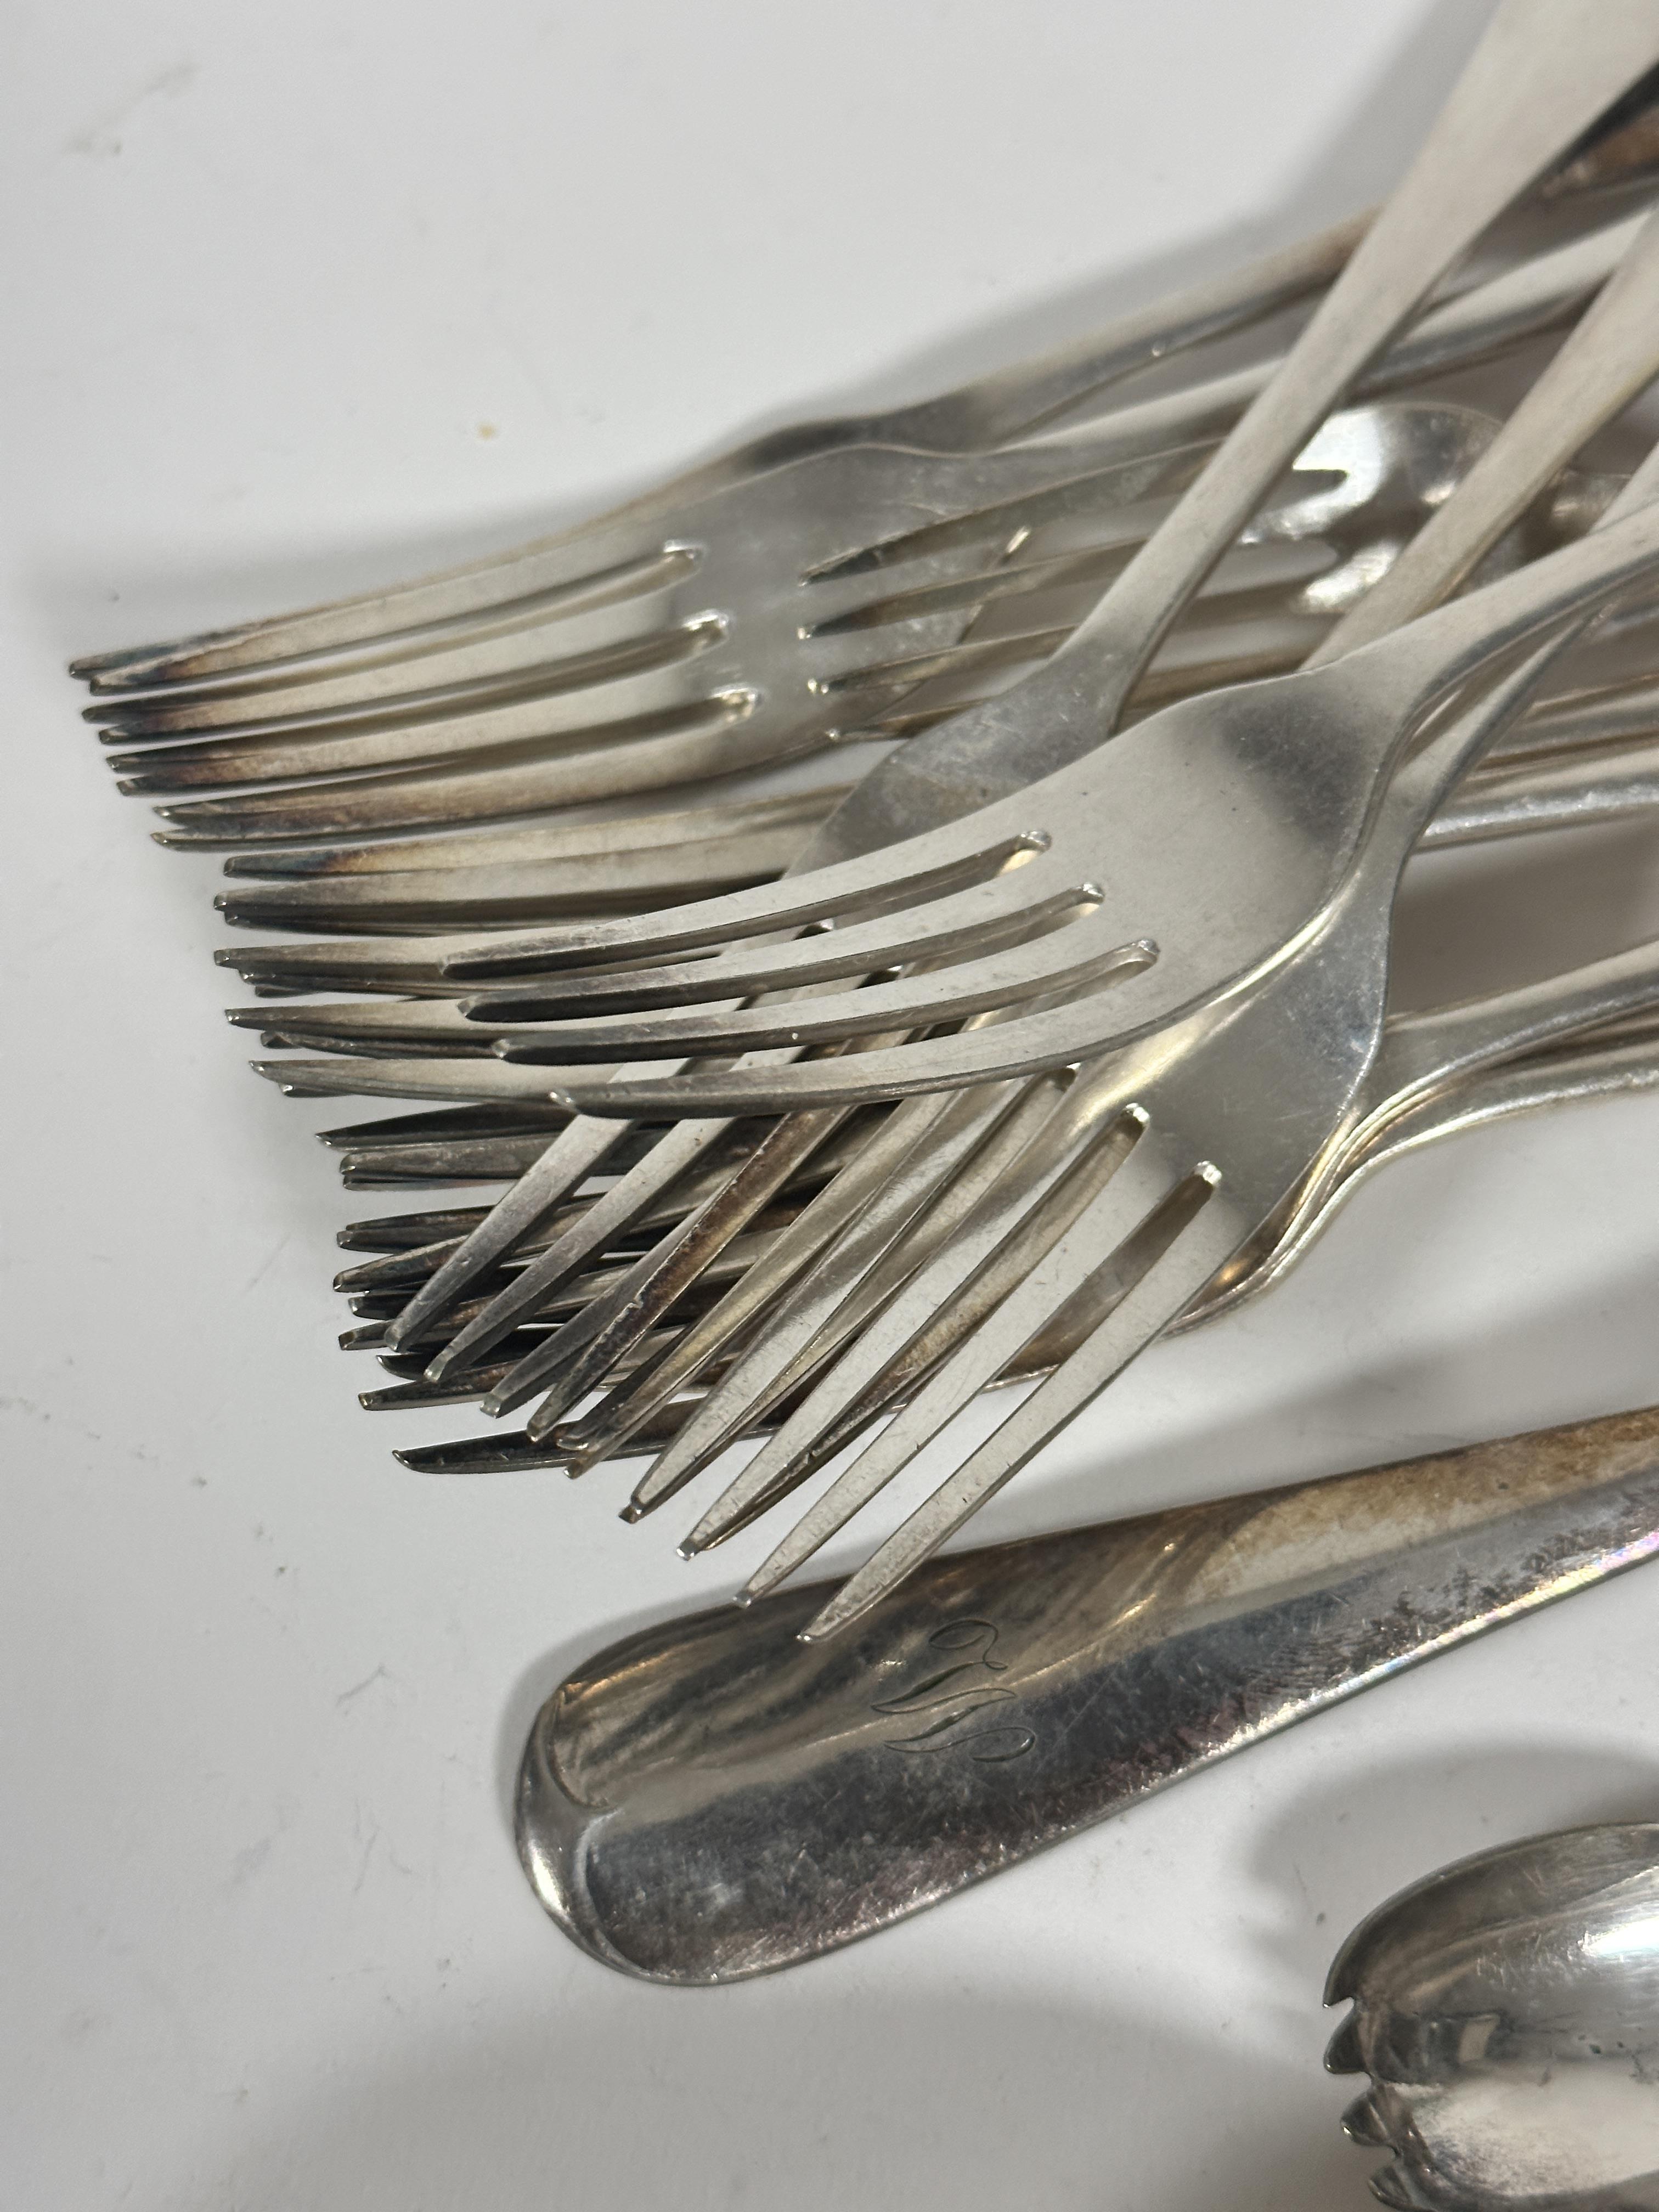 Thirteen Epns table forks engraved with initial M, Old English pattern, show signs of use and - Image 3 of 5